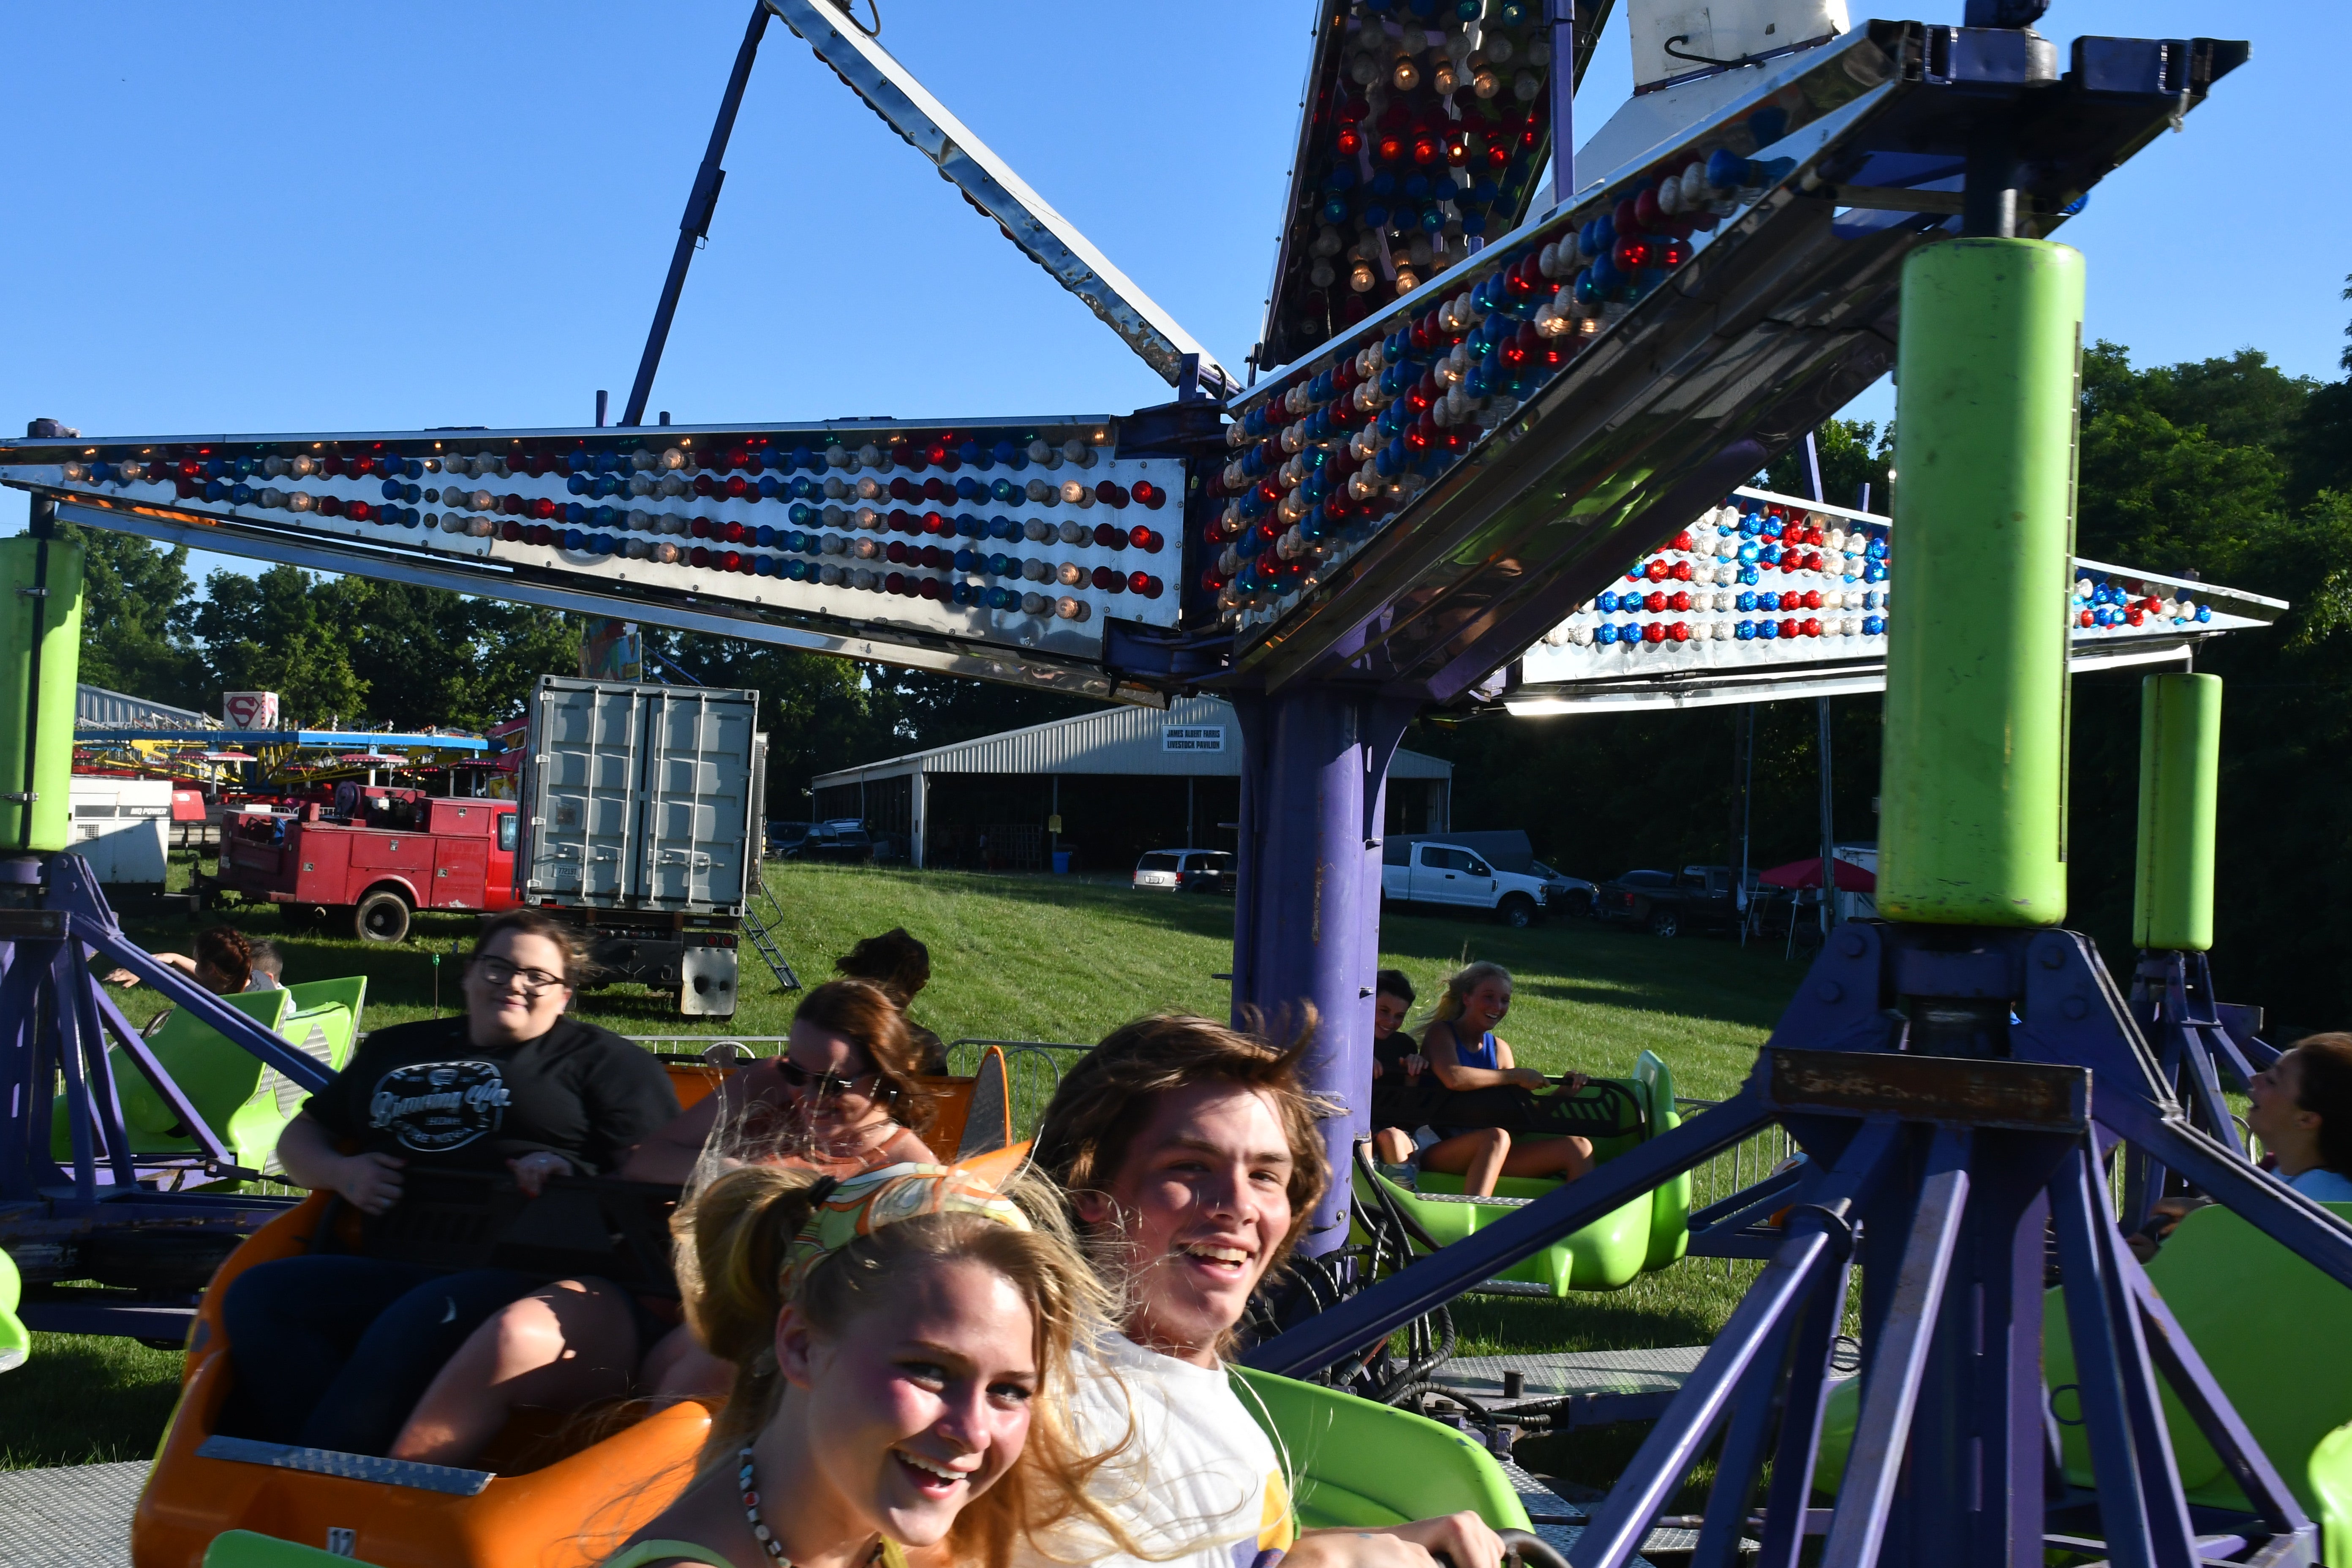 Cassada Herman (L) and Jack James (R) enjoy a spin onboard the Space Sled at the Clark County Fair.